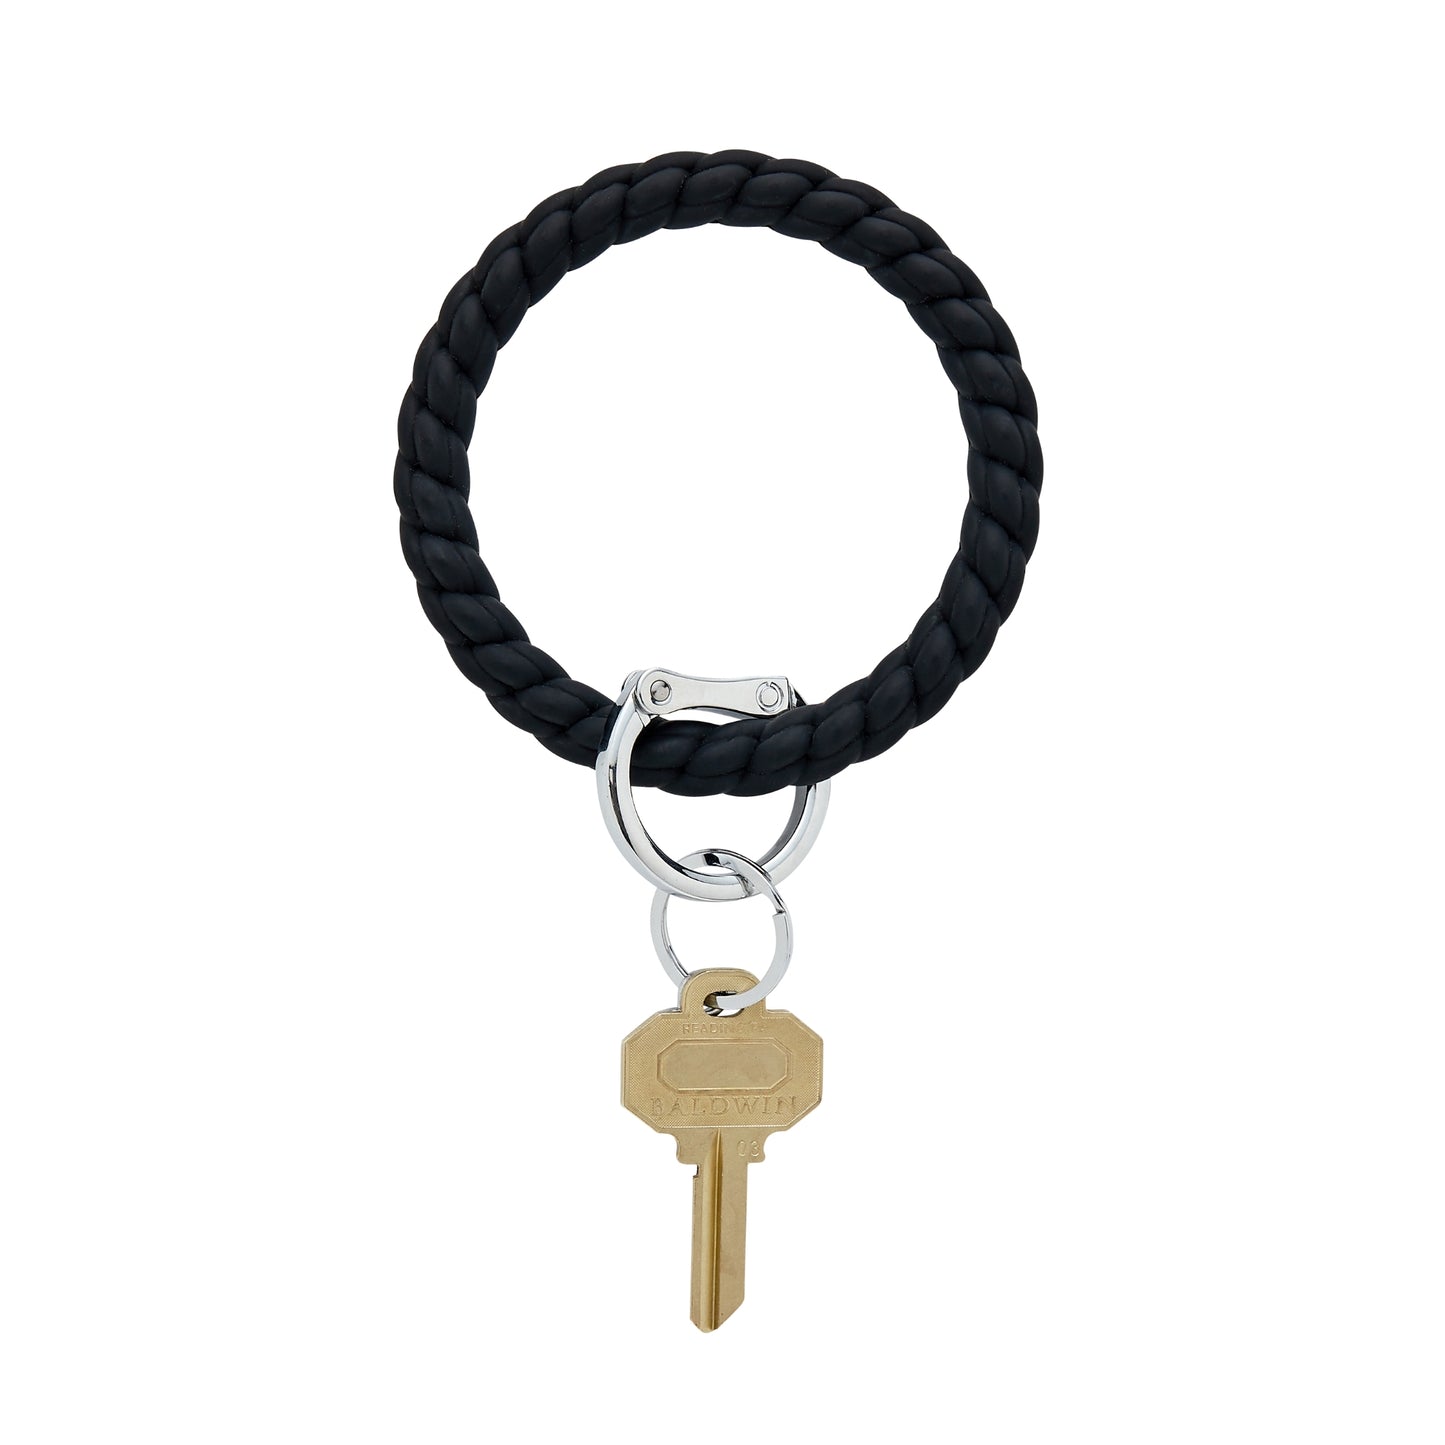 Big O Keyring in Black silicone braided effect.  This handsfree bracelet keychain is shown in black with split ring and key attached.